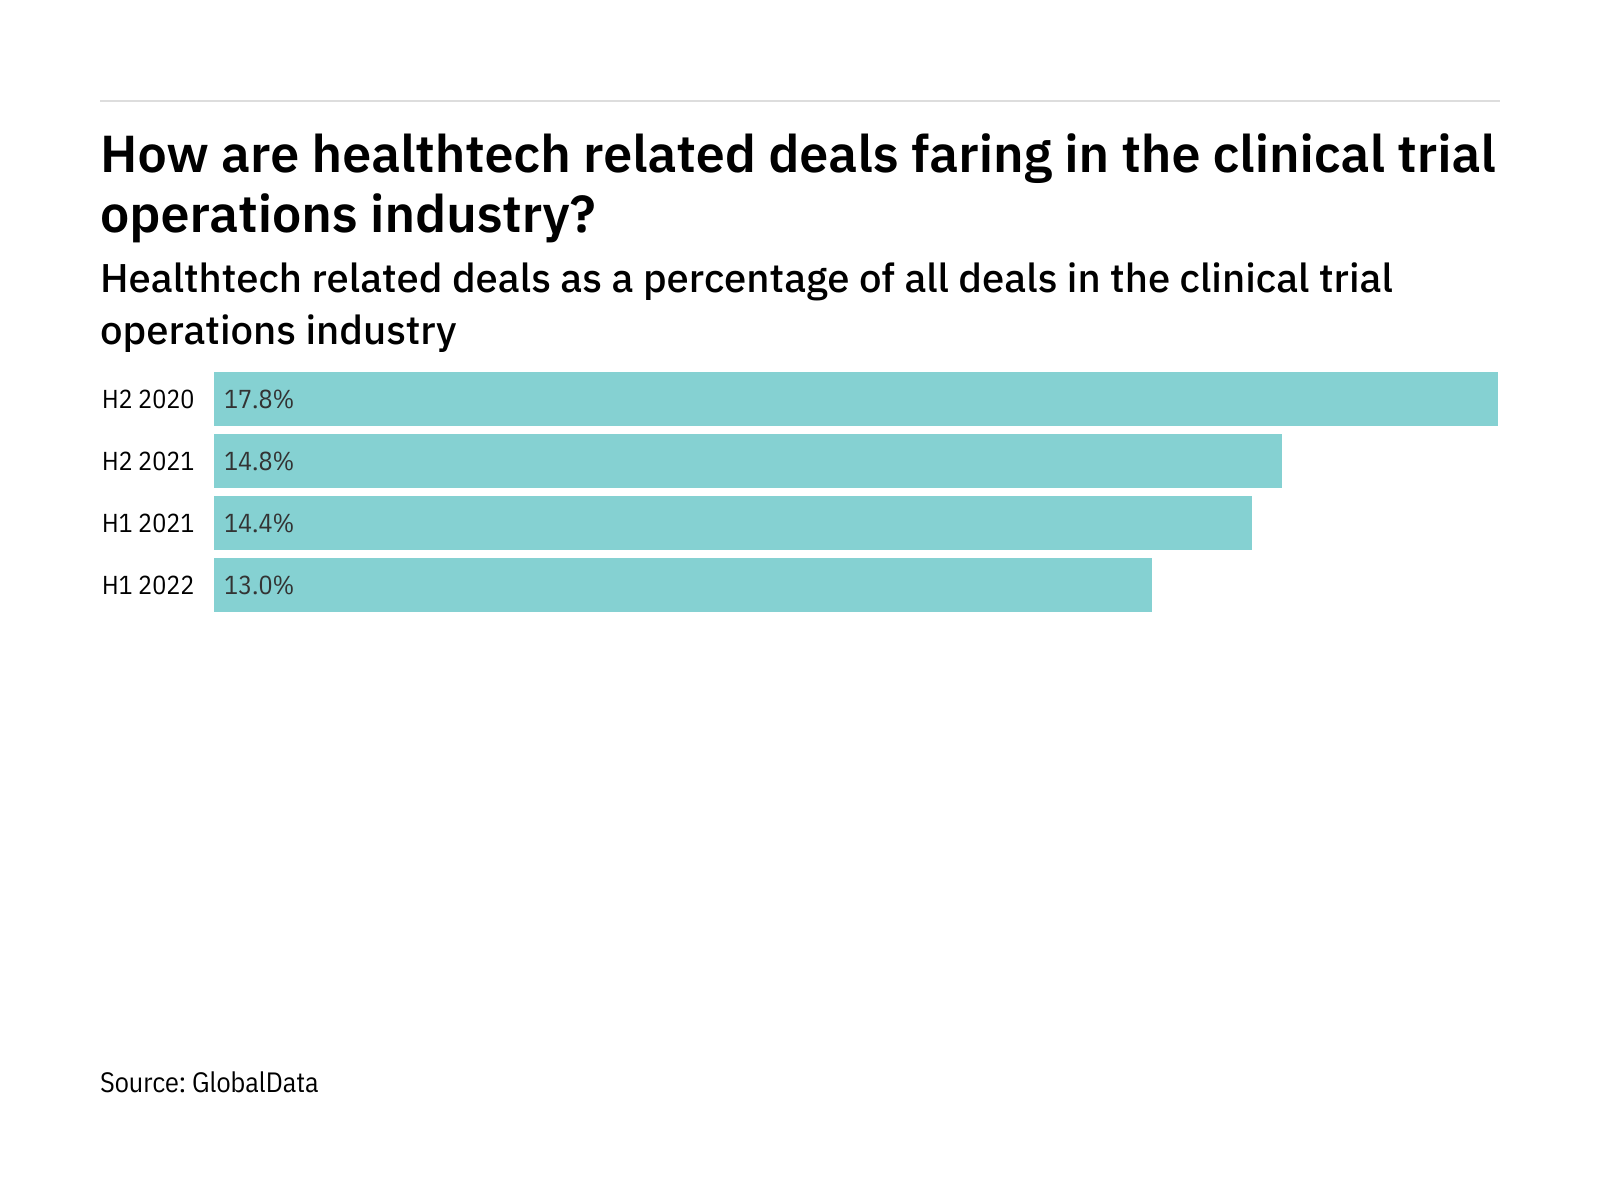 Healthtech deals decreased in clinical trial operations in H1 2022